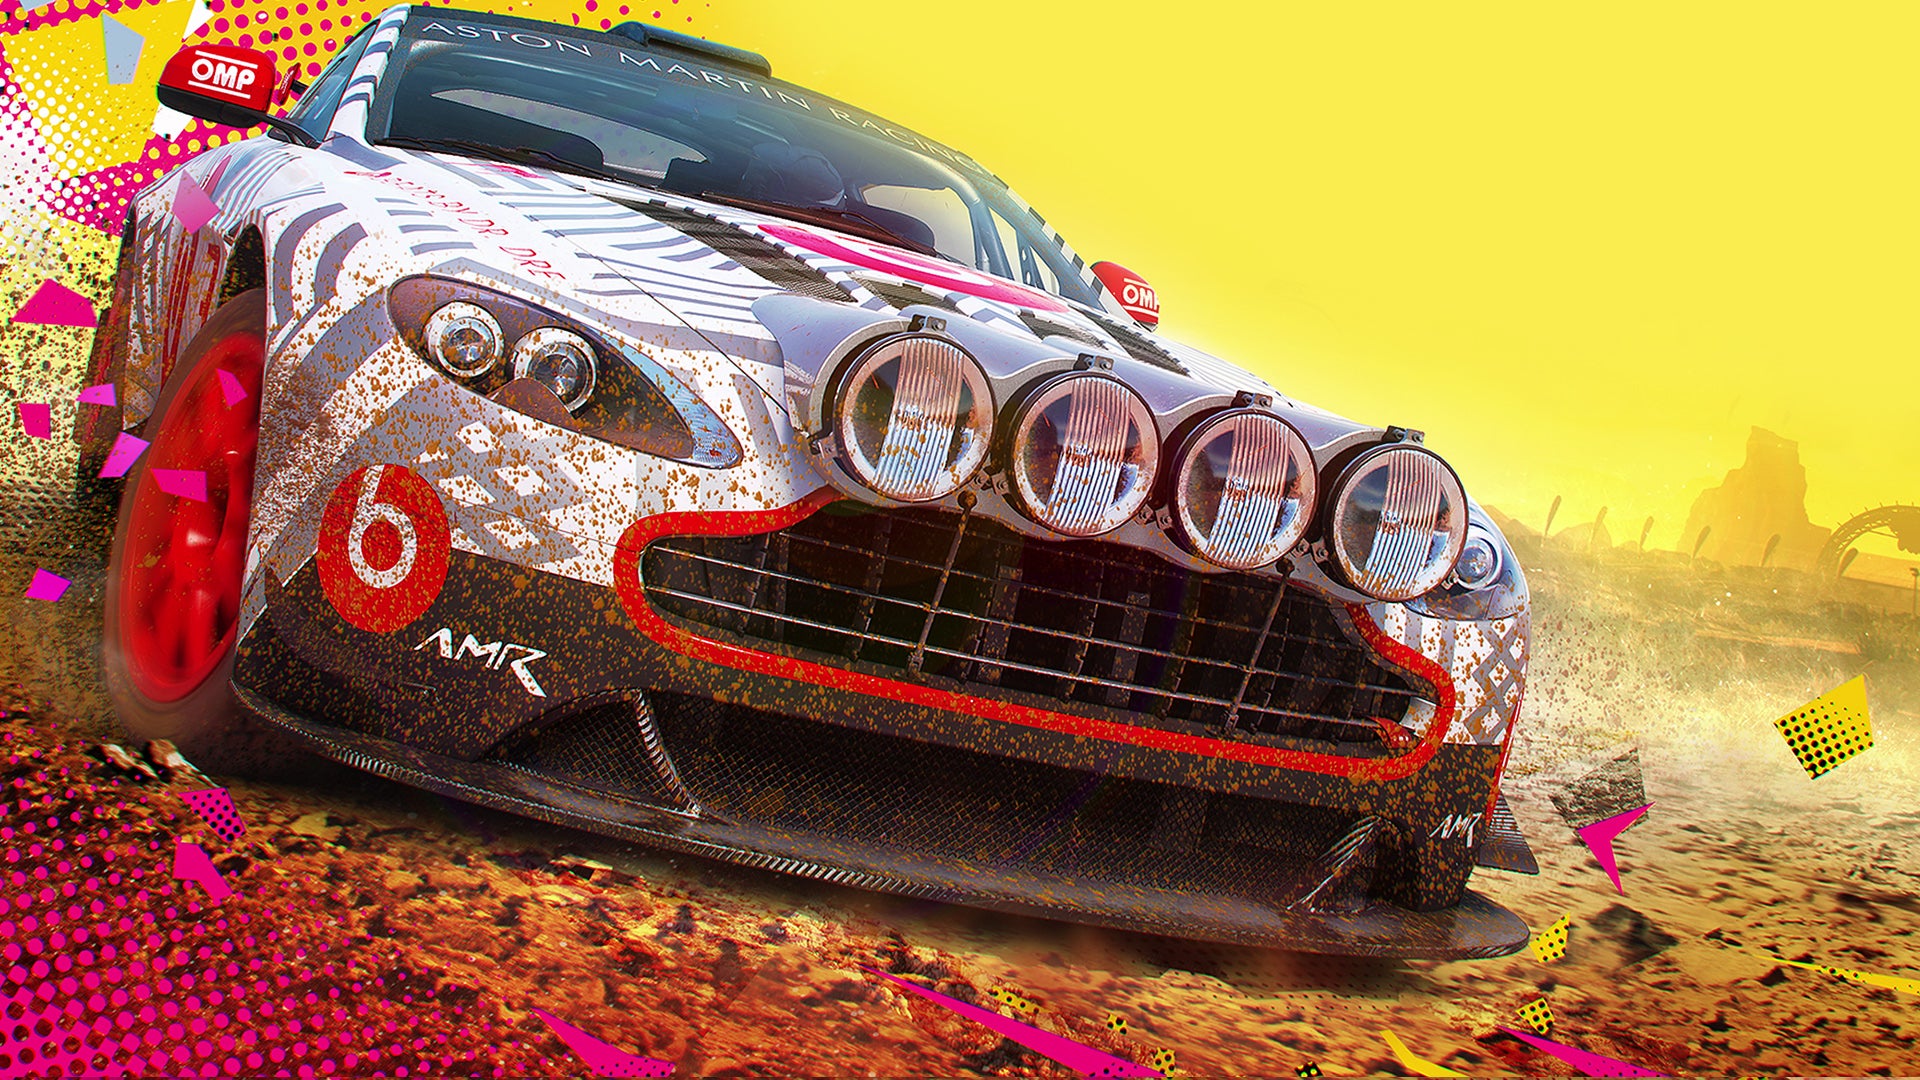 Image for Dirt 5: Xbox Series X Hands-On at 4K60 + 120Hz Mode Tested